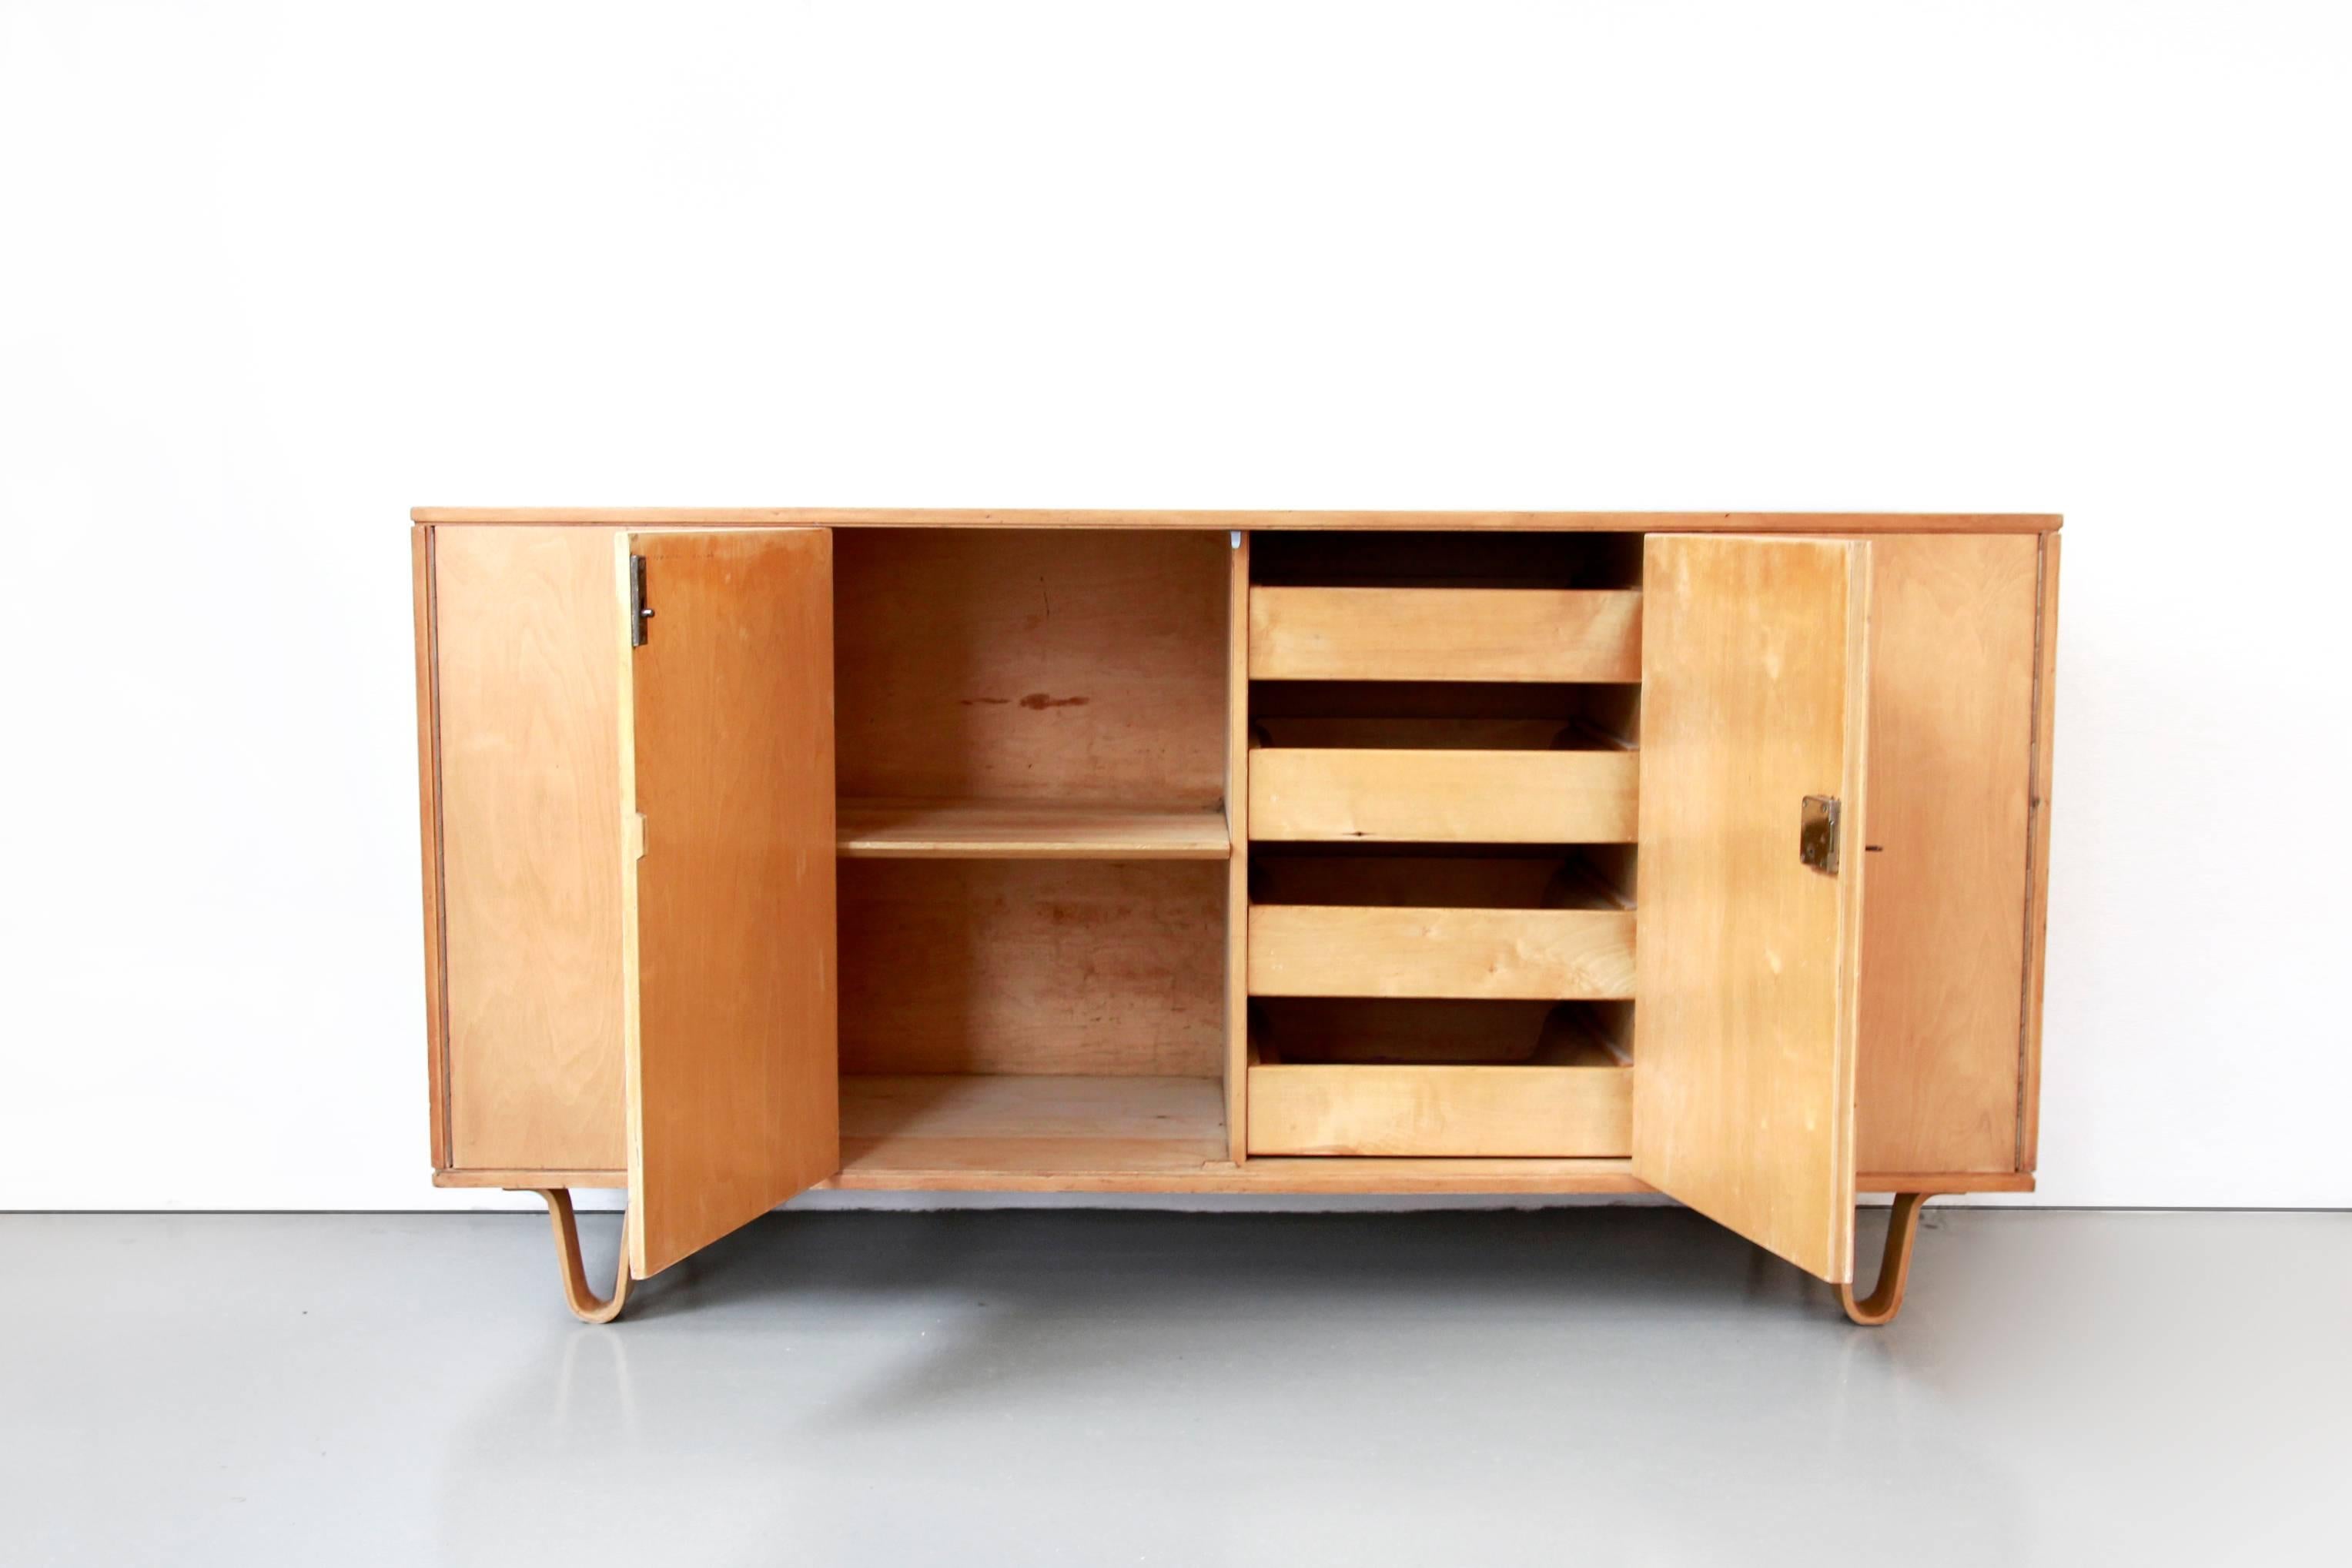 Minimalistic sideboard designed by Cees Braakman for UMS Pastoe, The Netherlands.
This credenza has the model name DB02 (Dressoir Birch number 02) and is made in birch and plywood.
This piece from the late 1950s has a very nice modernist design